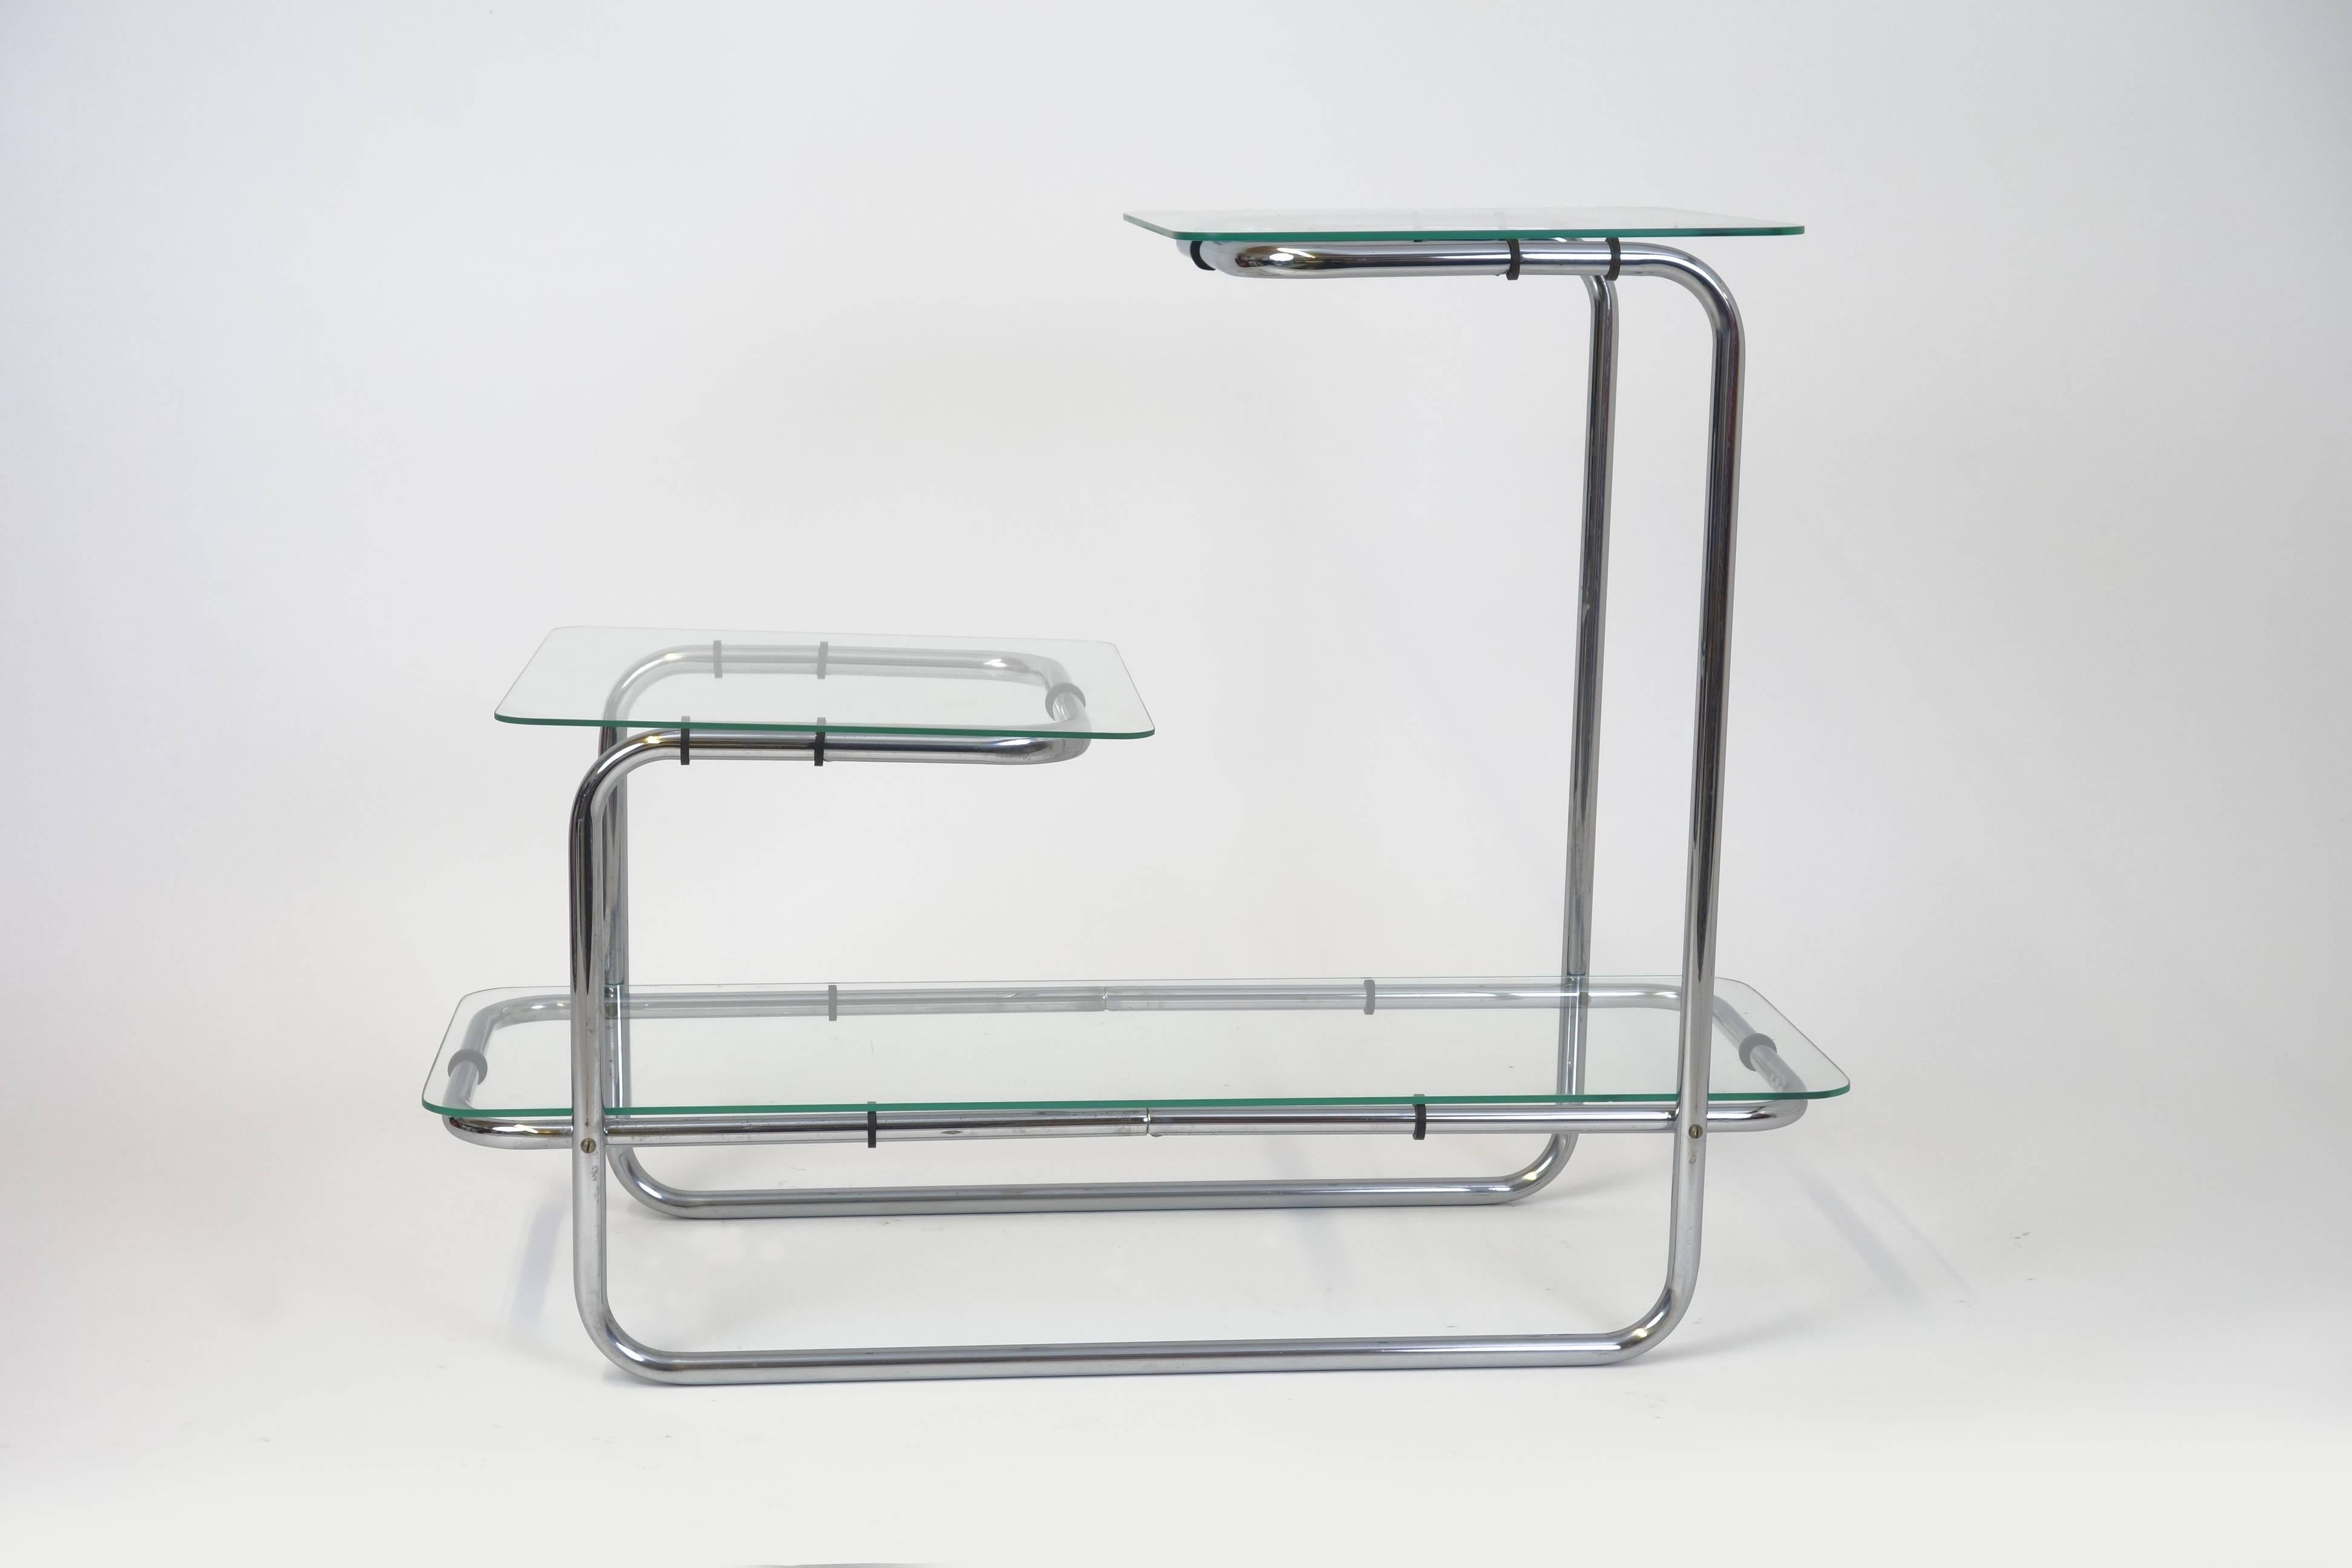 The fine and subtle flower shelf B 136 by Emile Guyot for Thonet, made in the 1930s. This functional tubular steel shelf, designed in the Bauhaus style, has 3 levels and, not only be suitable for flowers, will find place even in well-furnished